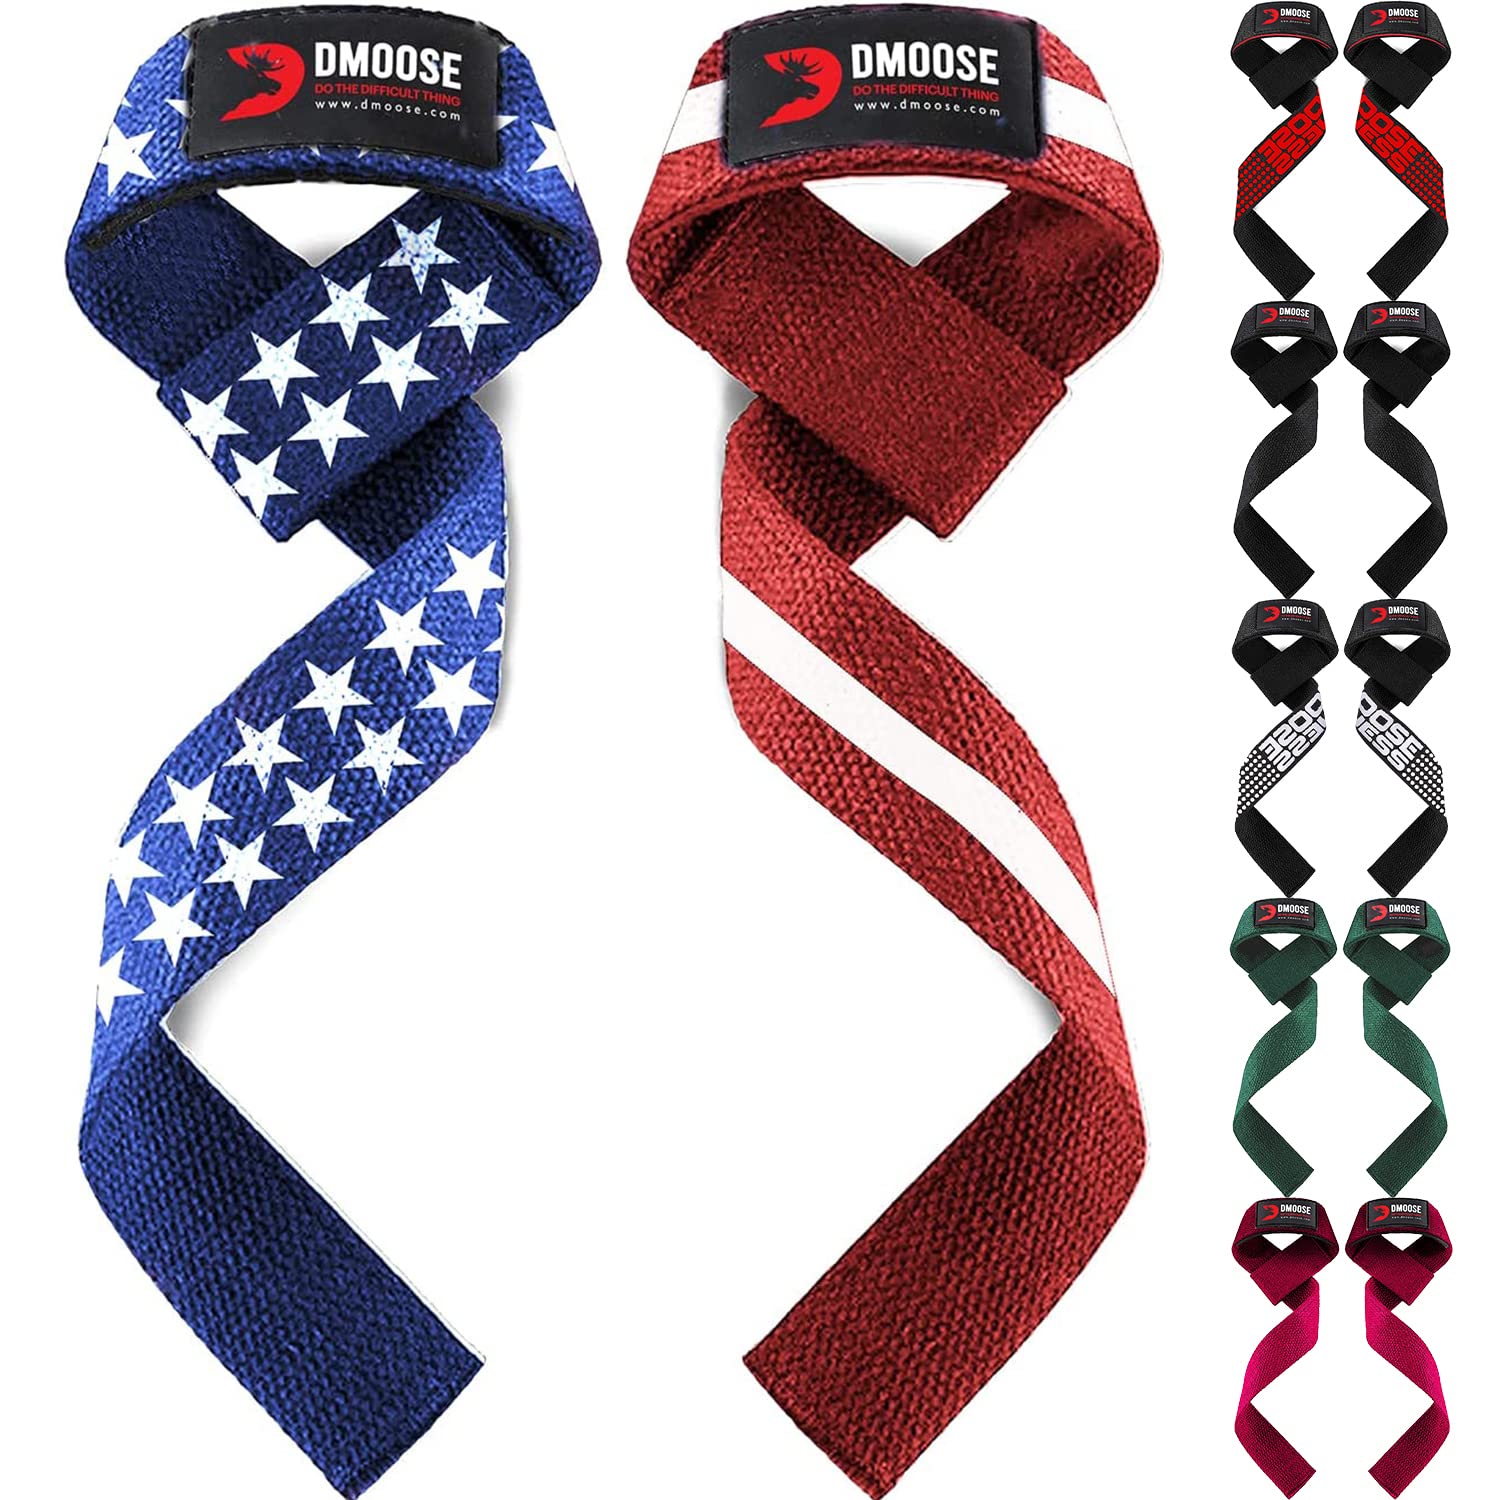 Maximize Your Lifts With DMoose Lifting Straps